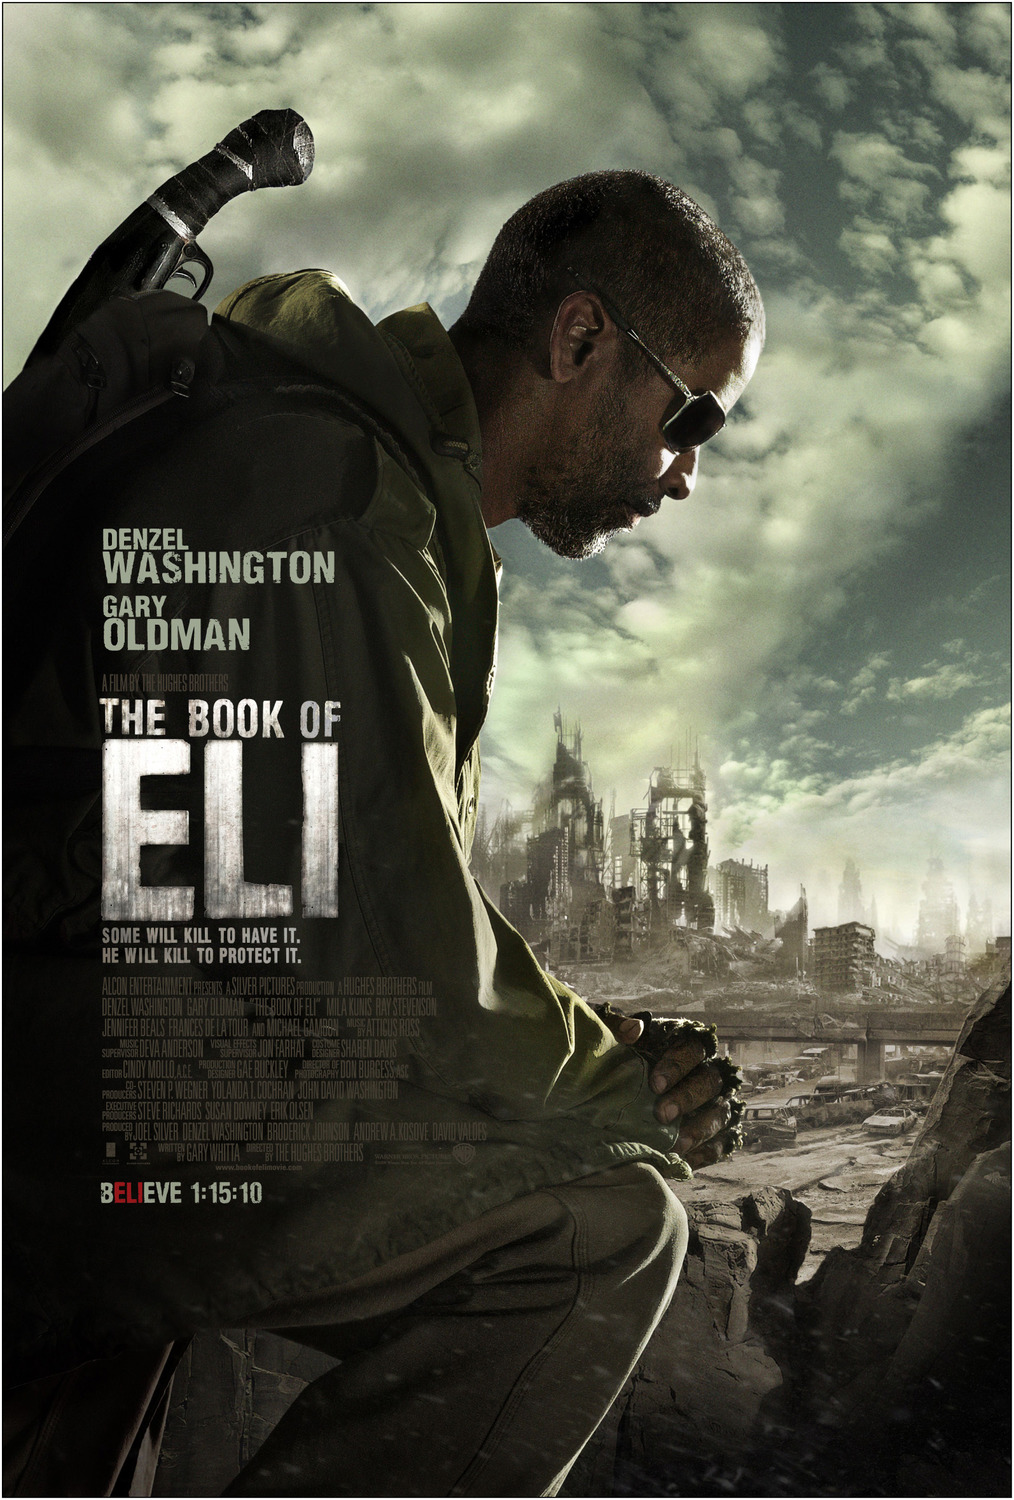 The Book of Eli (2 of 8) Extra Large Movie Poster Image IMP Awards